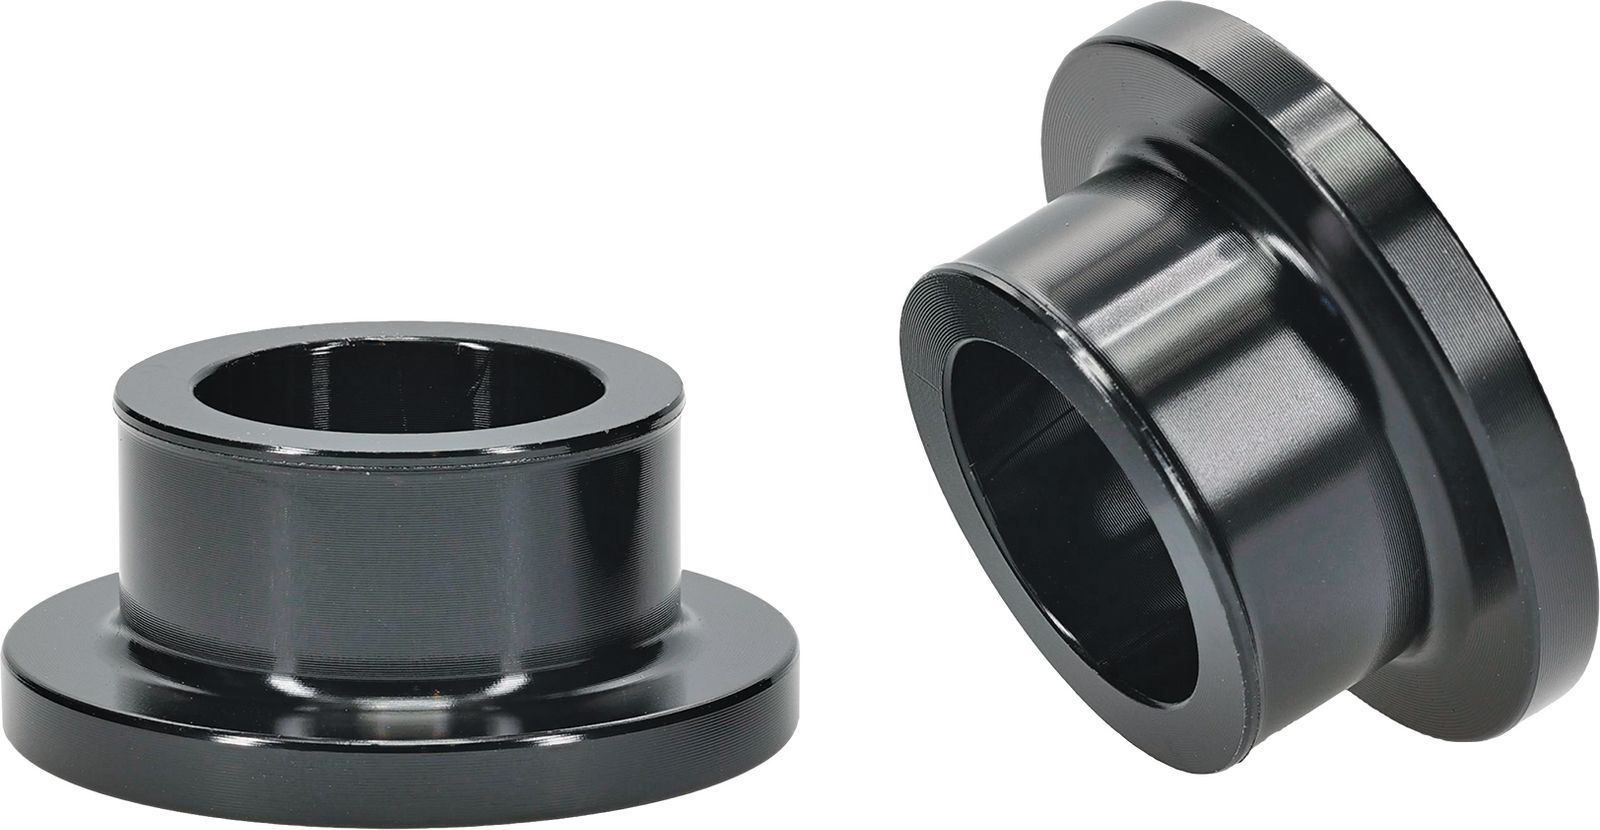 Wrp Rear Wheel Spacer Kits - WRP111013-1 image